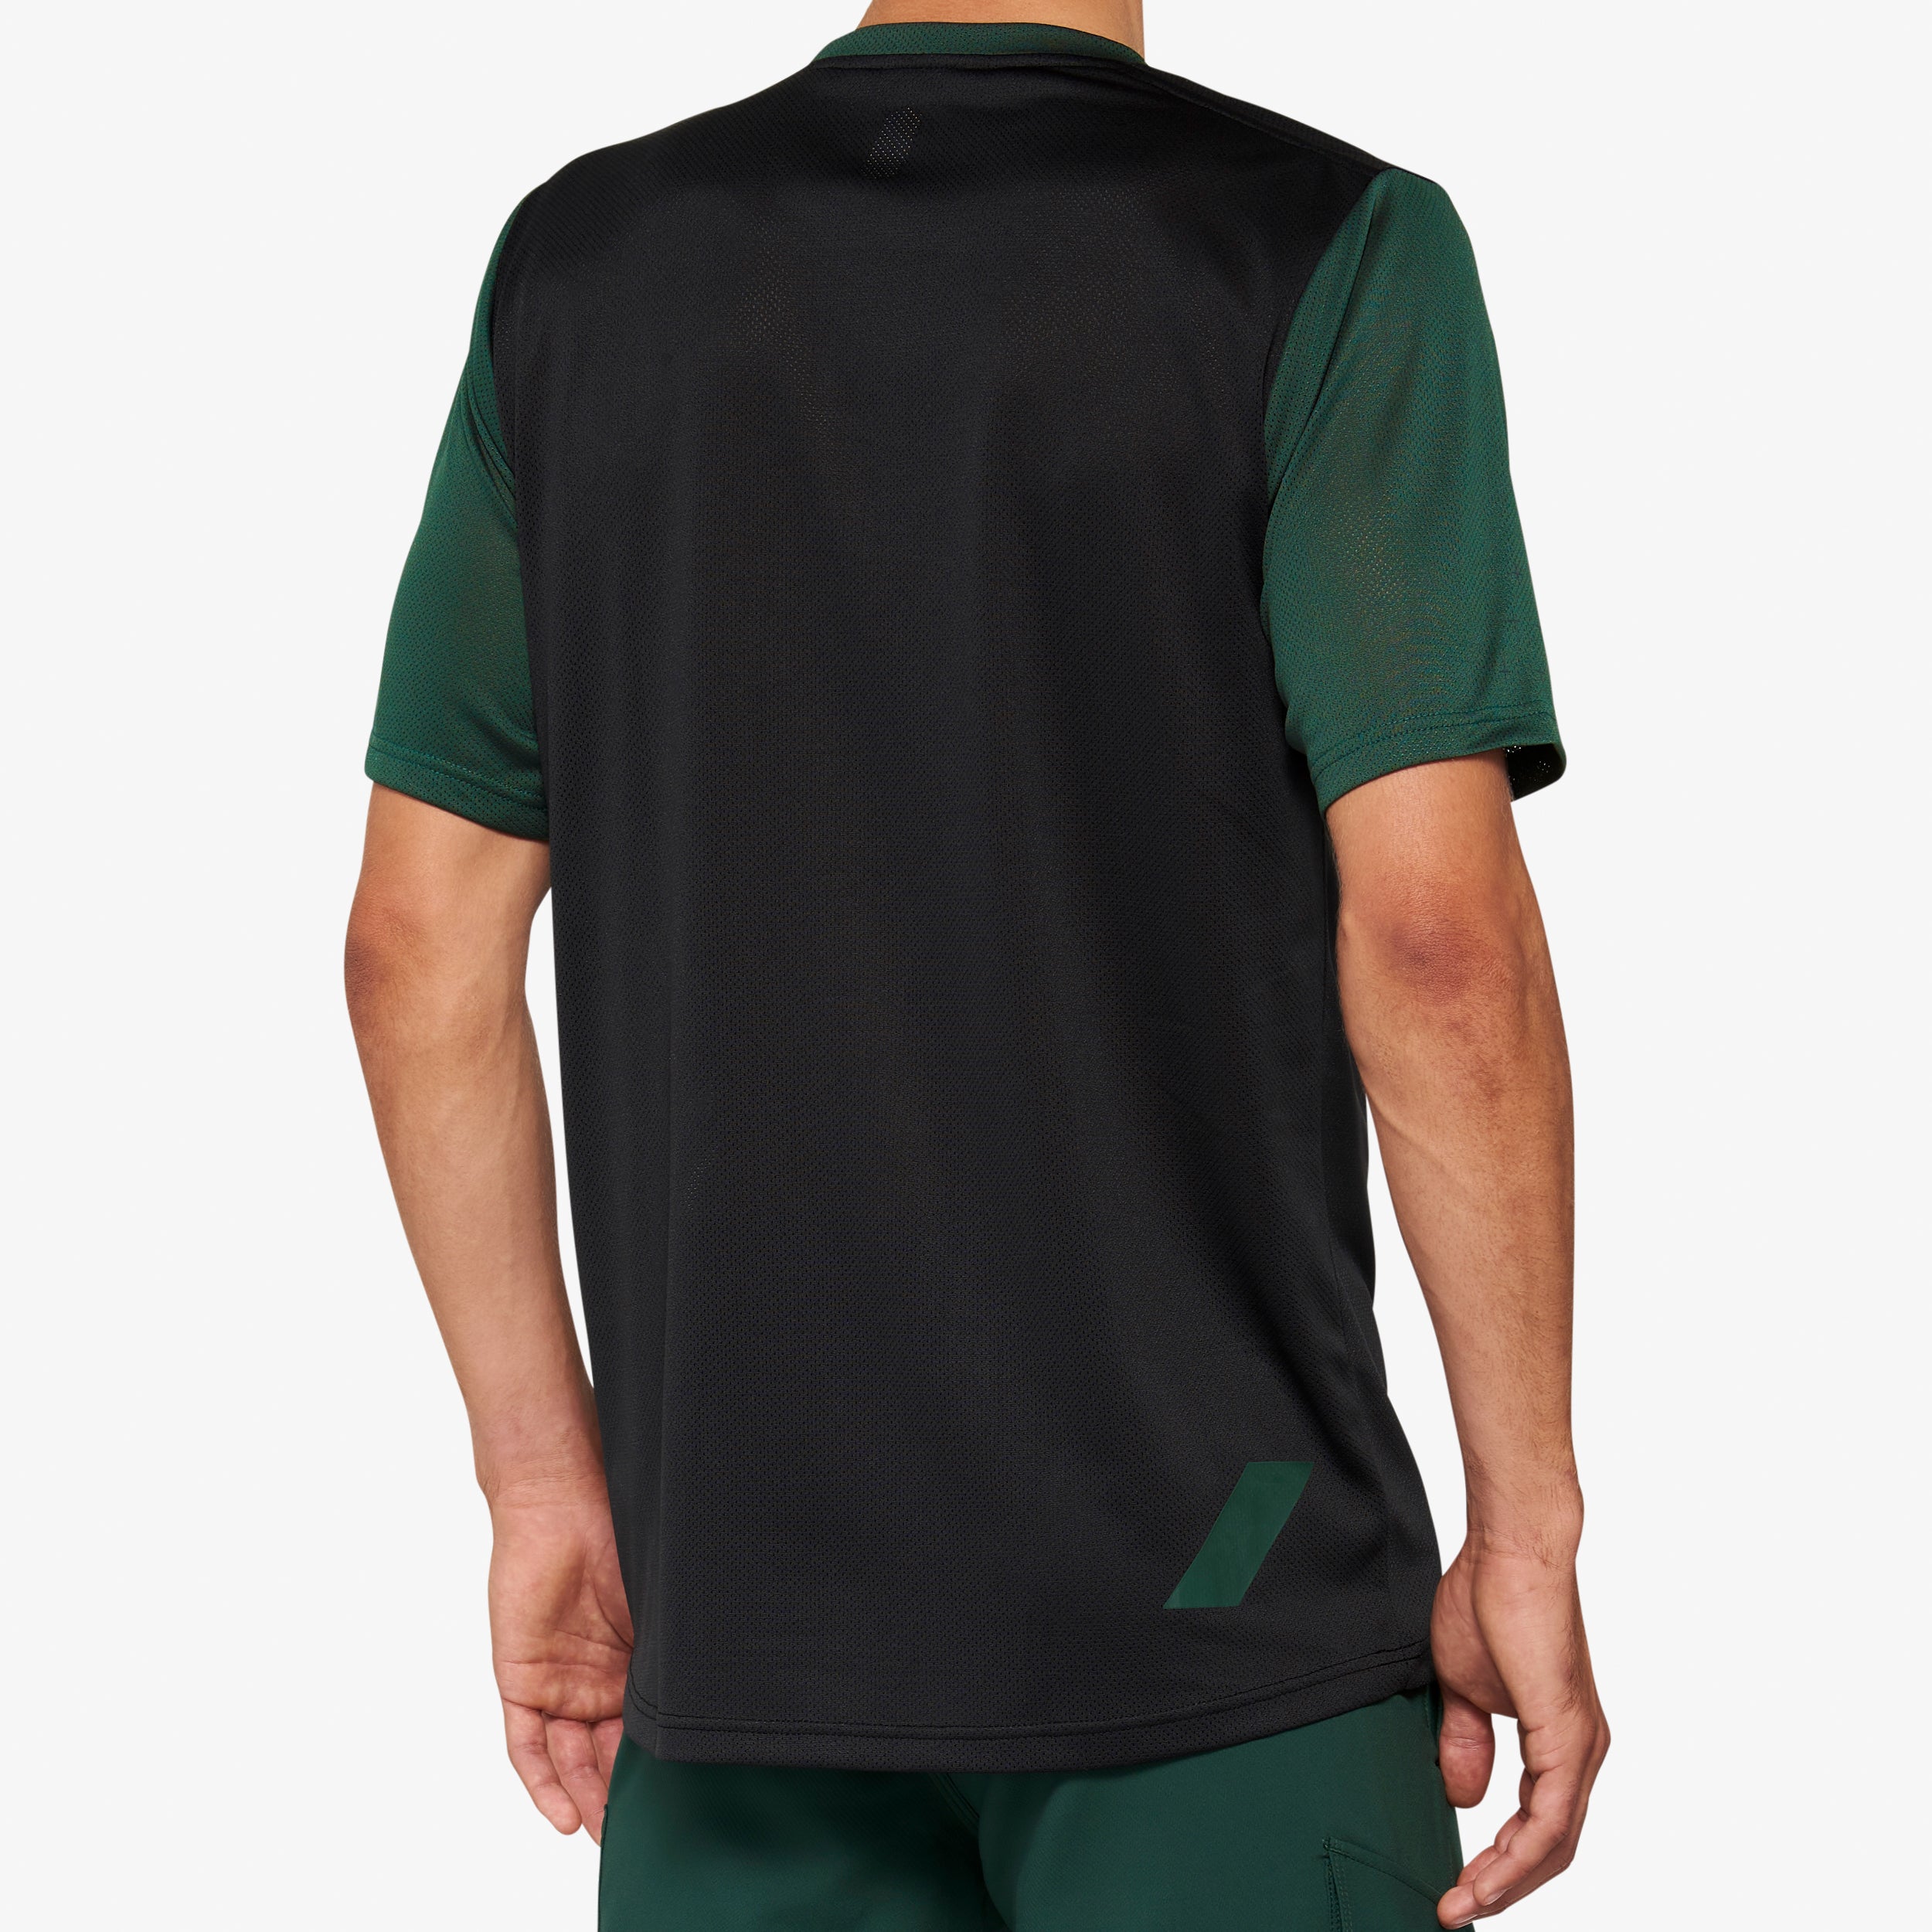 RIDECAMP Short Sleeve Jersey Black/Forest Green - Secondary